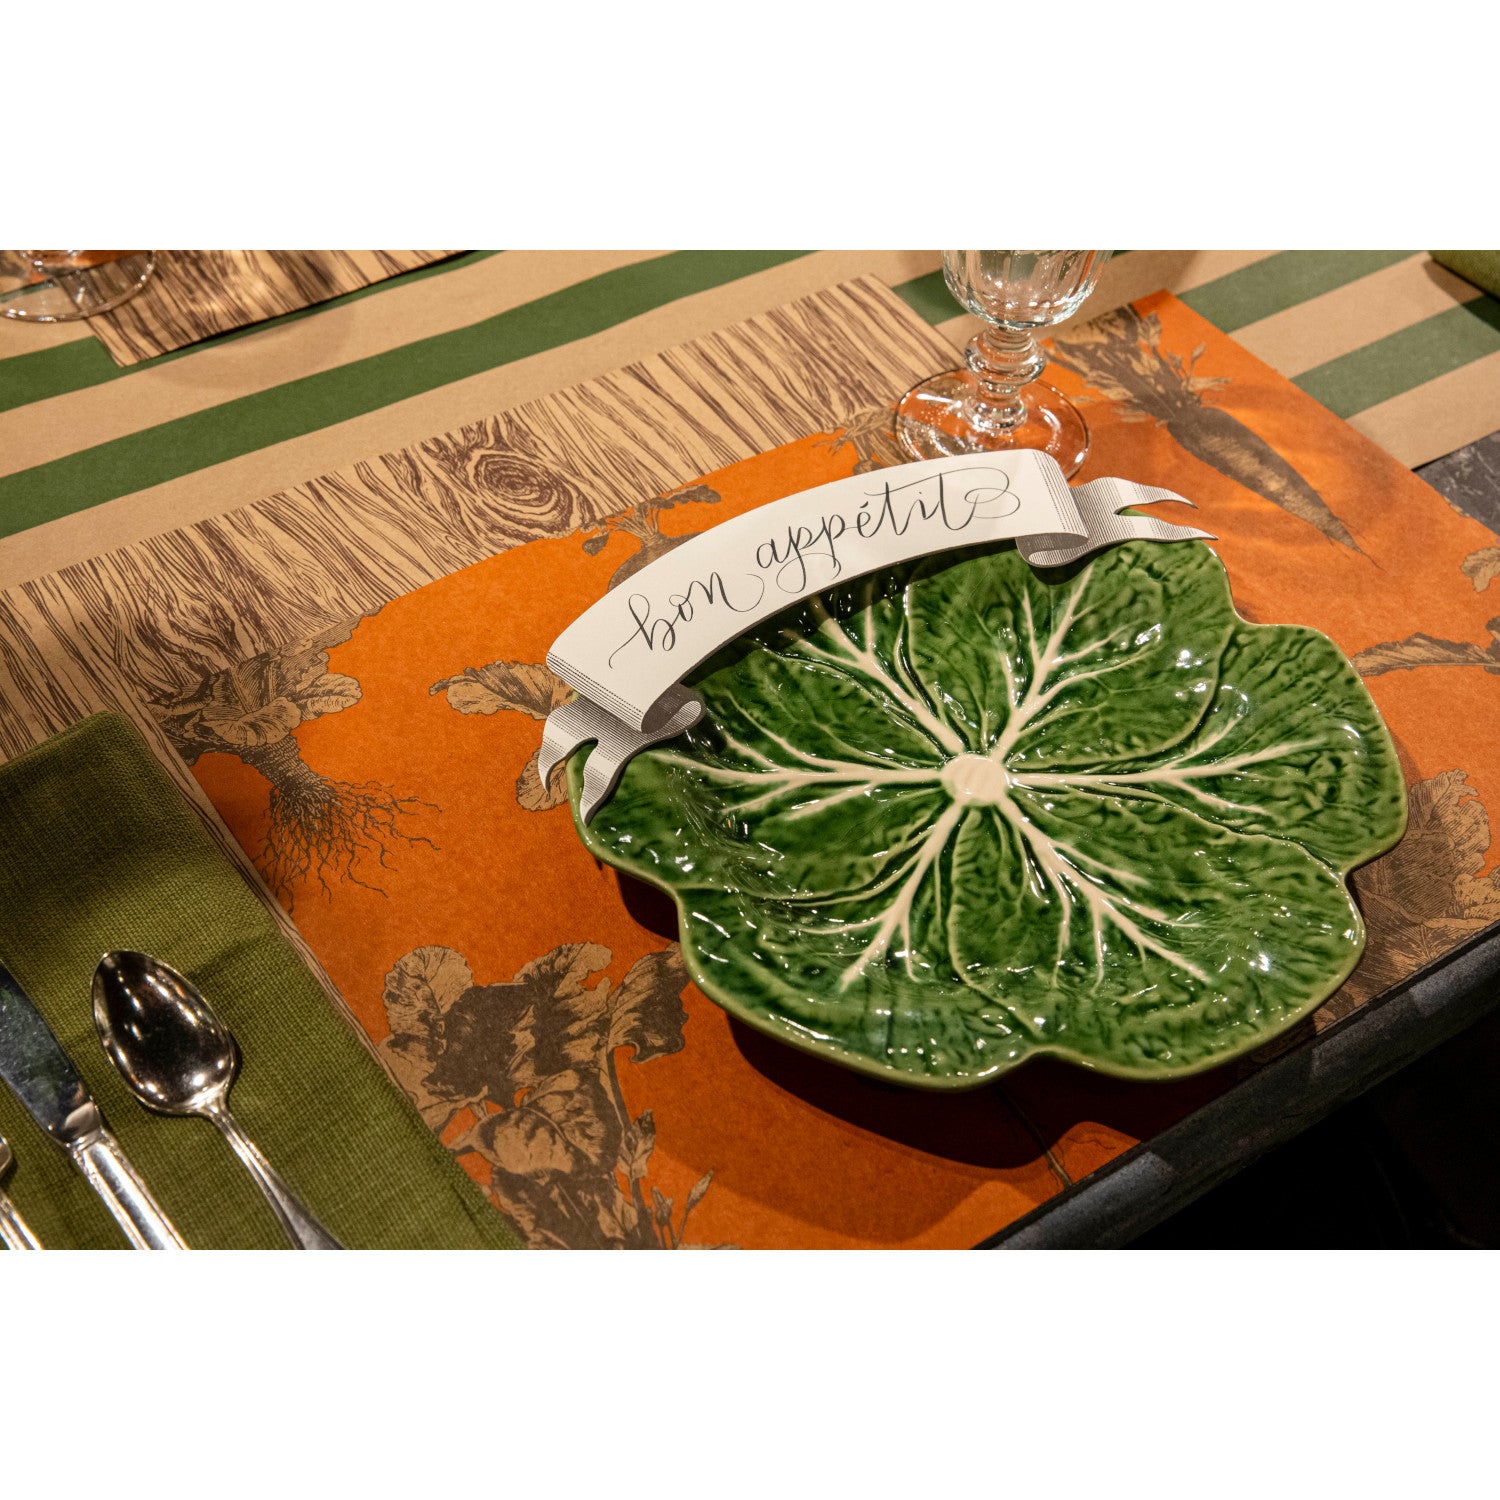 The Oak Placemat under a fall-themed place setting.